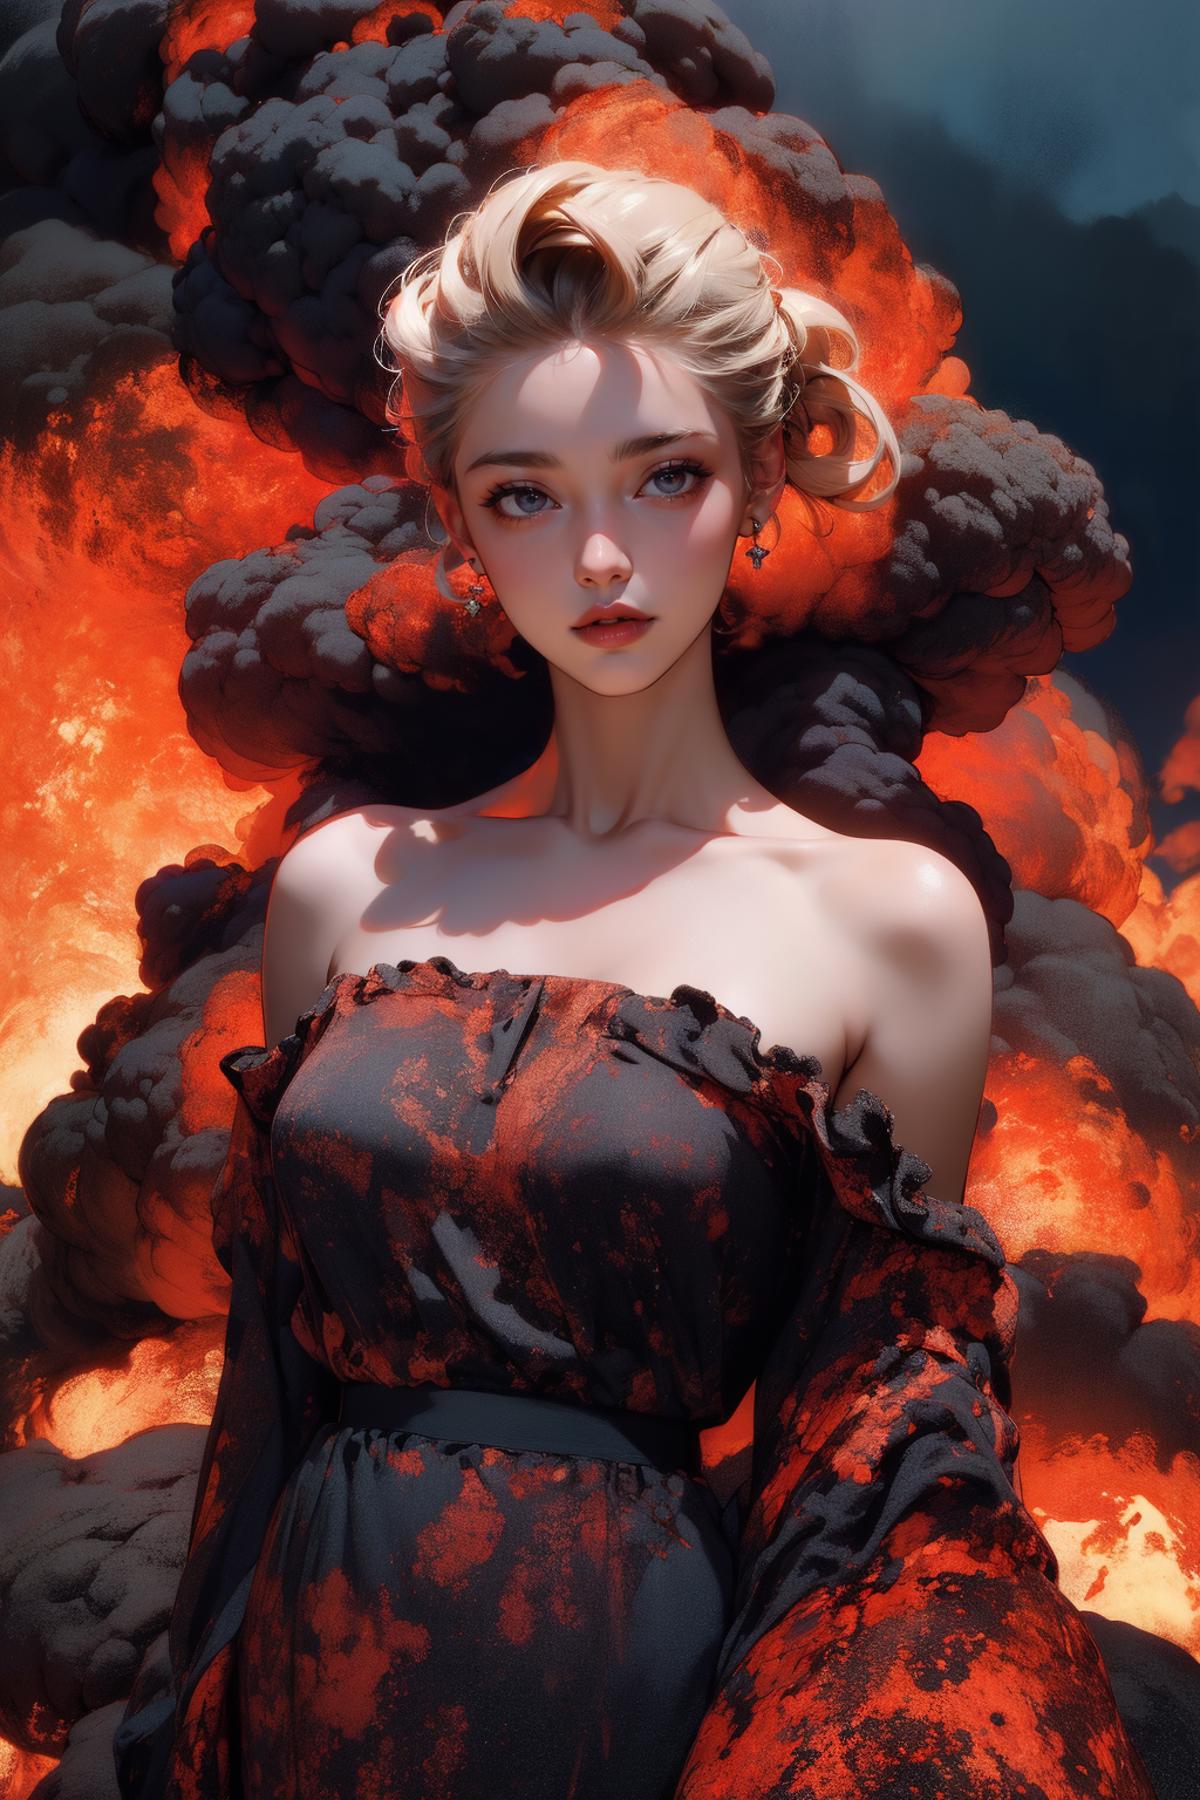 Lava Gown image by Astraali